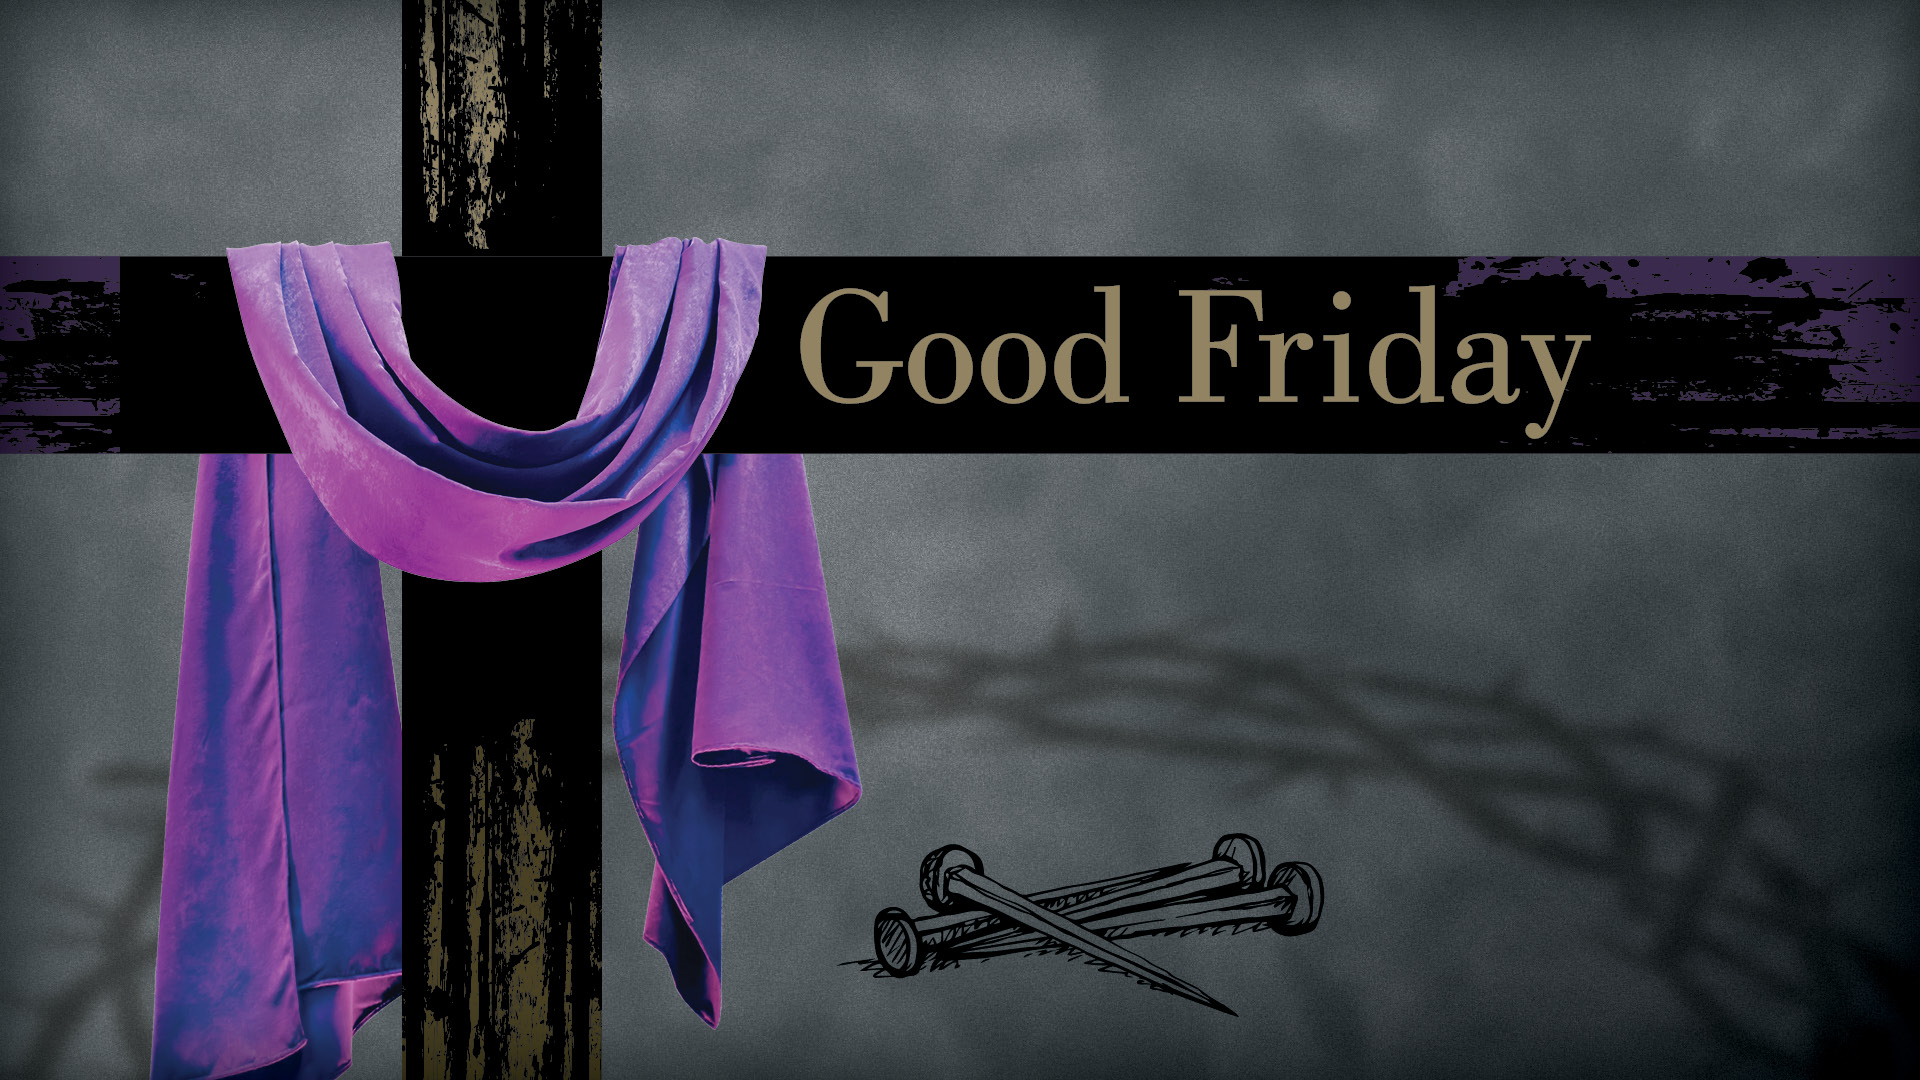 Good Friday
Candlelight Worship with Holy Communion
April 7 | 7:30 p.m. | Oak Brook & Online
